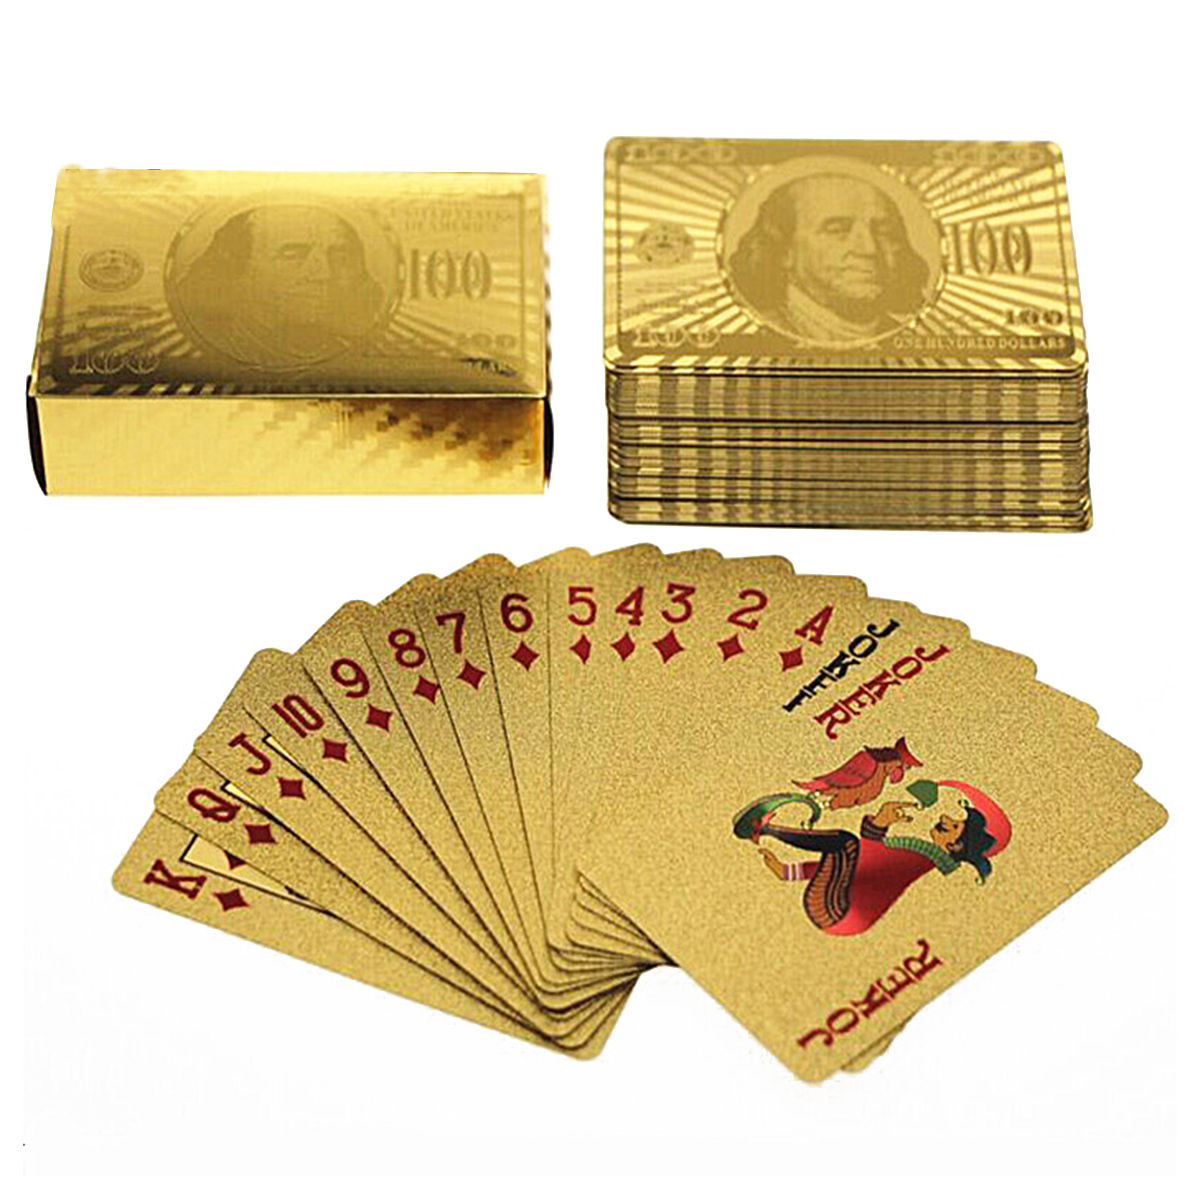 24 Karat Gold Foil Playing Cards 24K Gold and Silver Plated Replica Bills 3